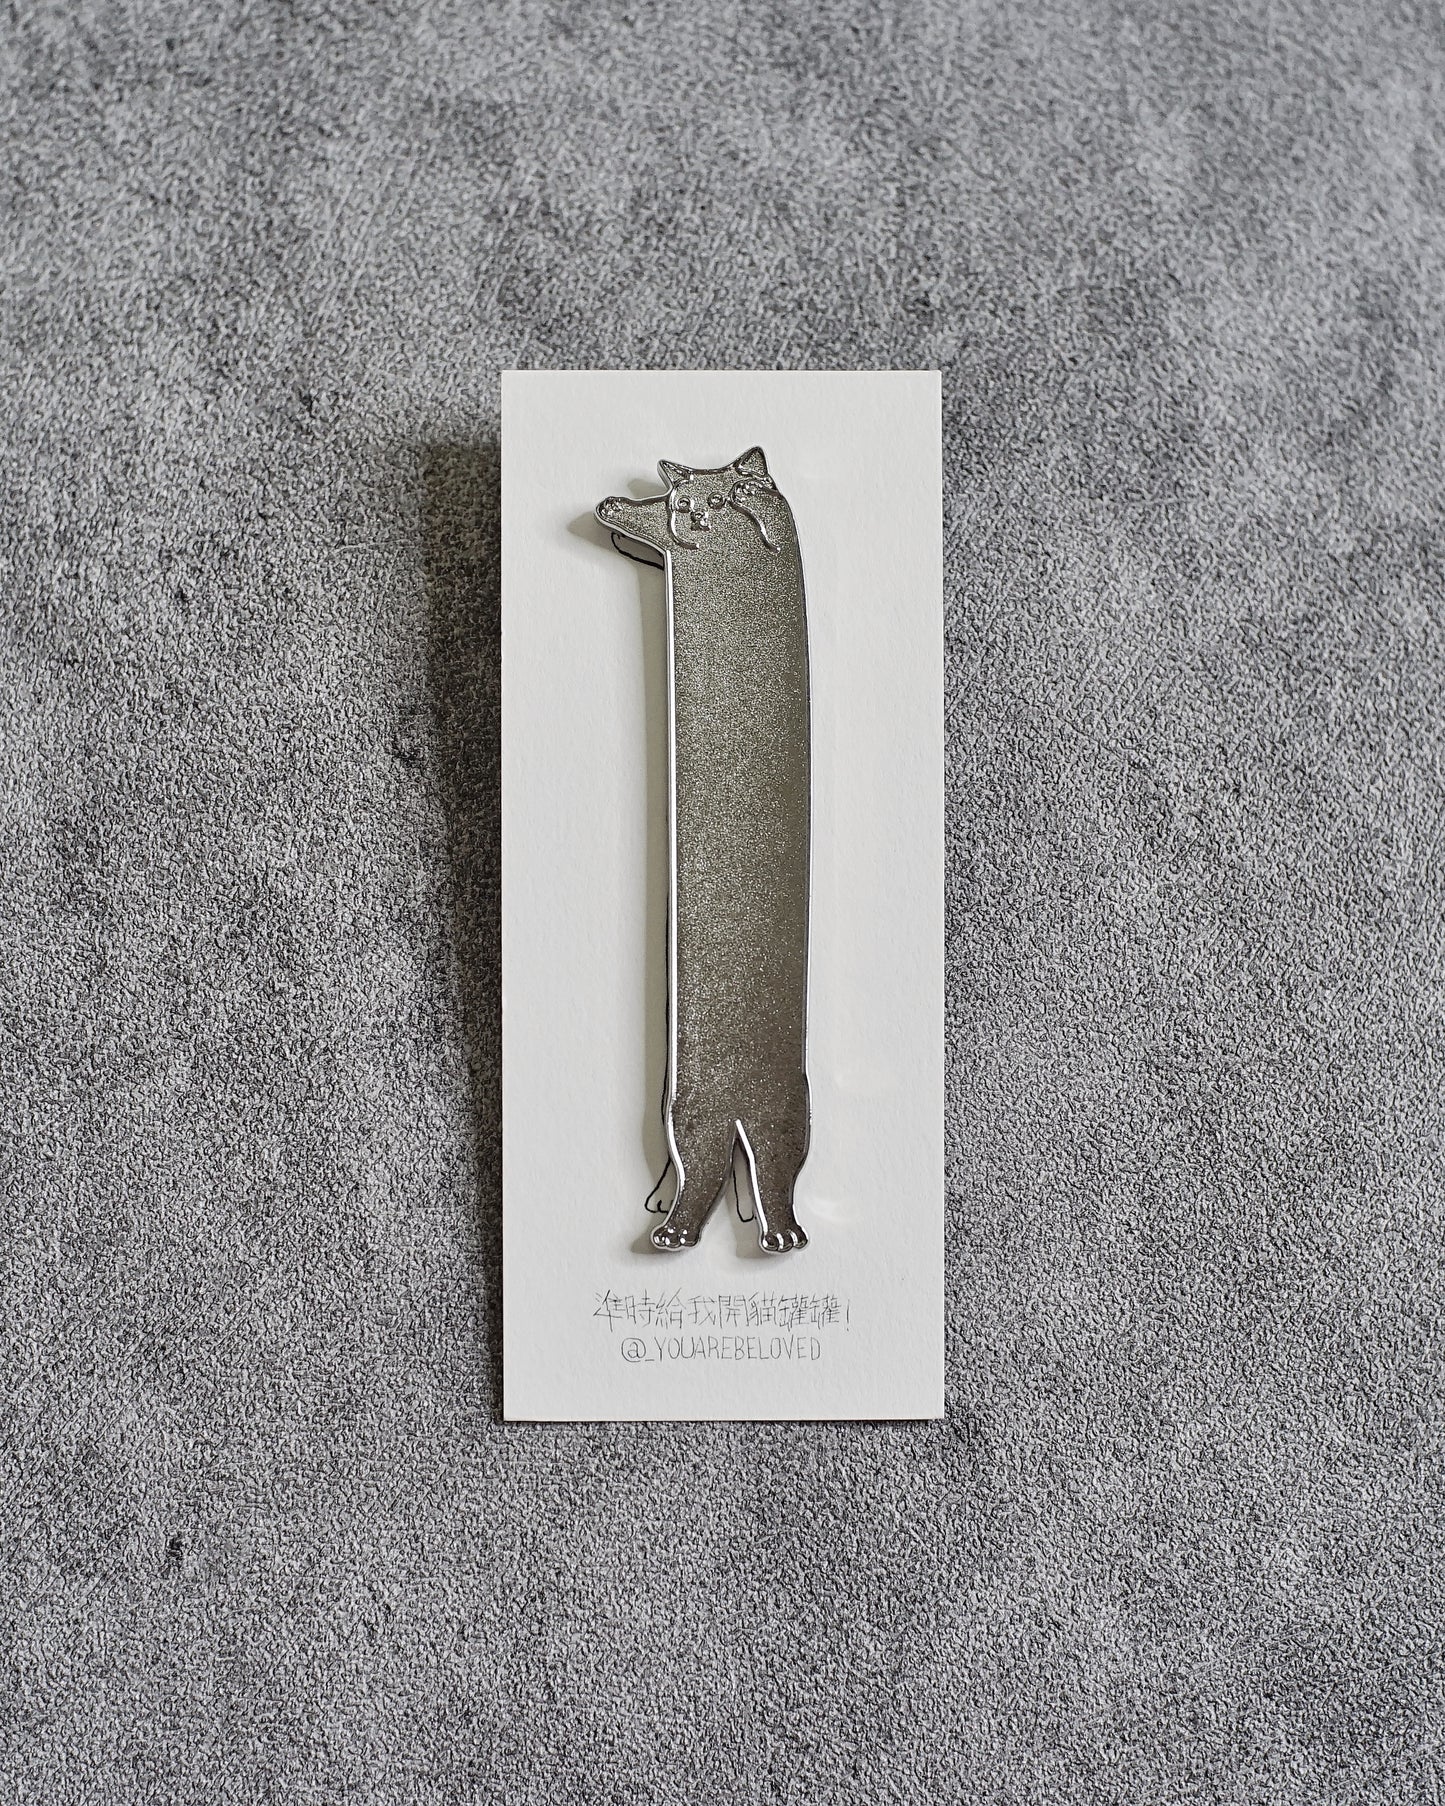 Stretch long cat meow badge